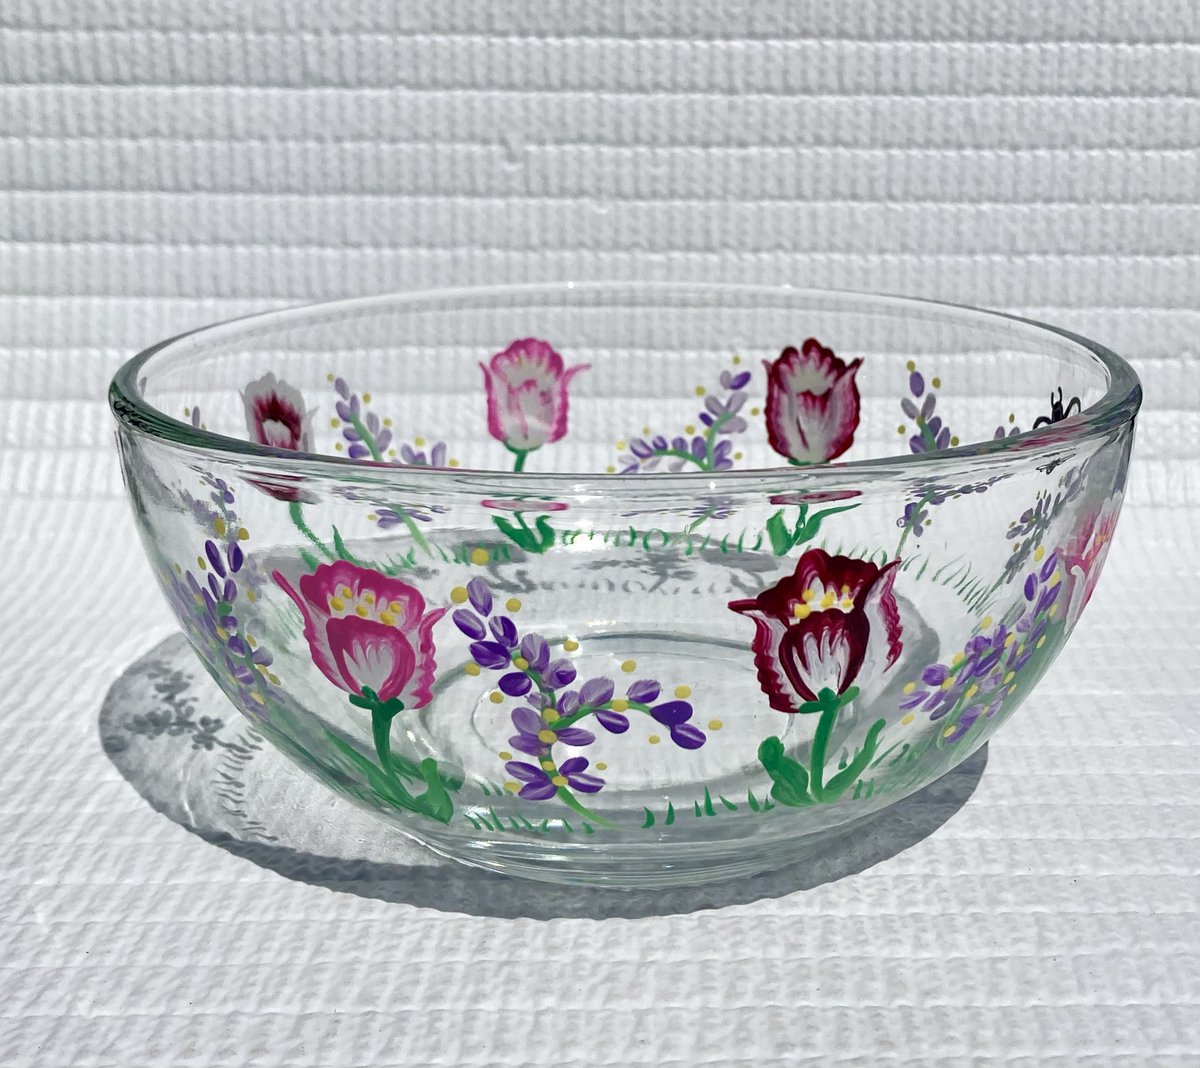 Check out this candy dish etsy.com/listing/170018… #candydish #candybowl #handpaintedbowl #SMILEtt23 #CraftBizParty #etsy #etsyshop #giftsforher